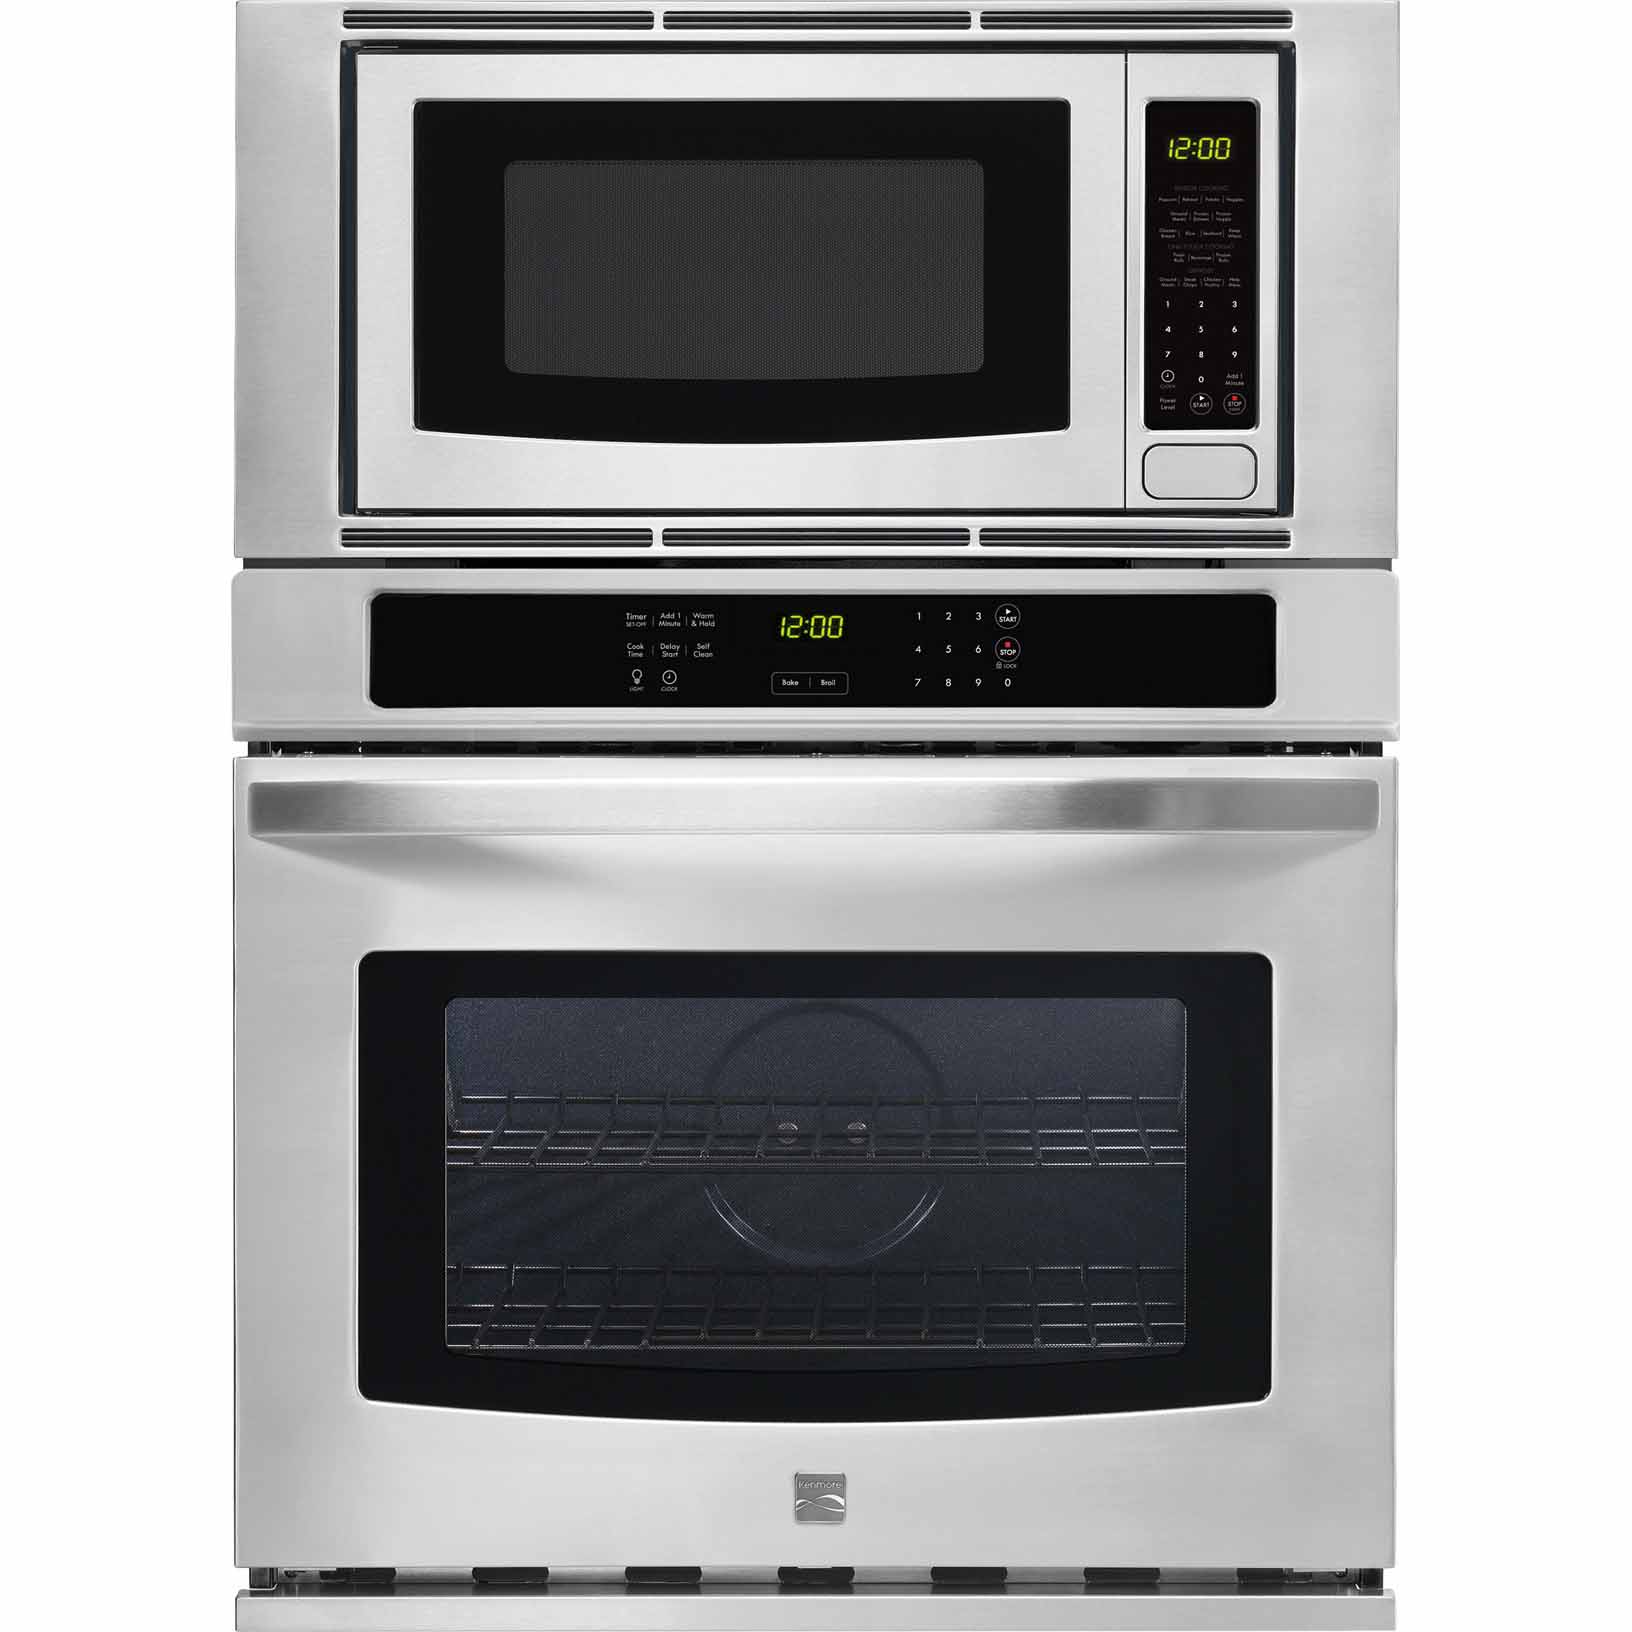 0012505801259 - 49613 30 ELECTRIC COMBINATION WALL OVEN - STAINLESS STEEL